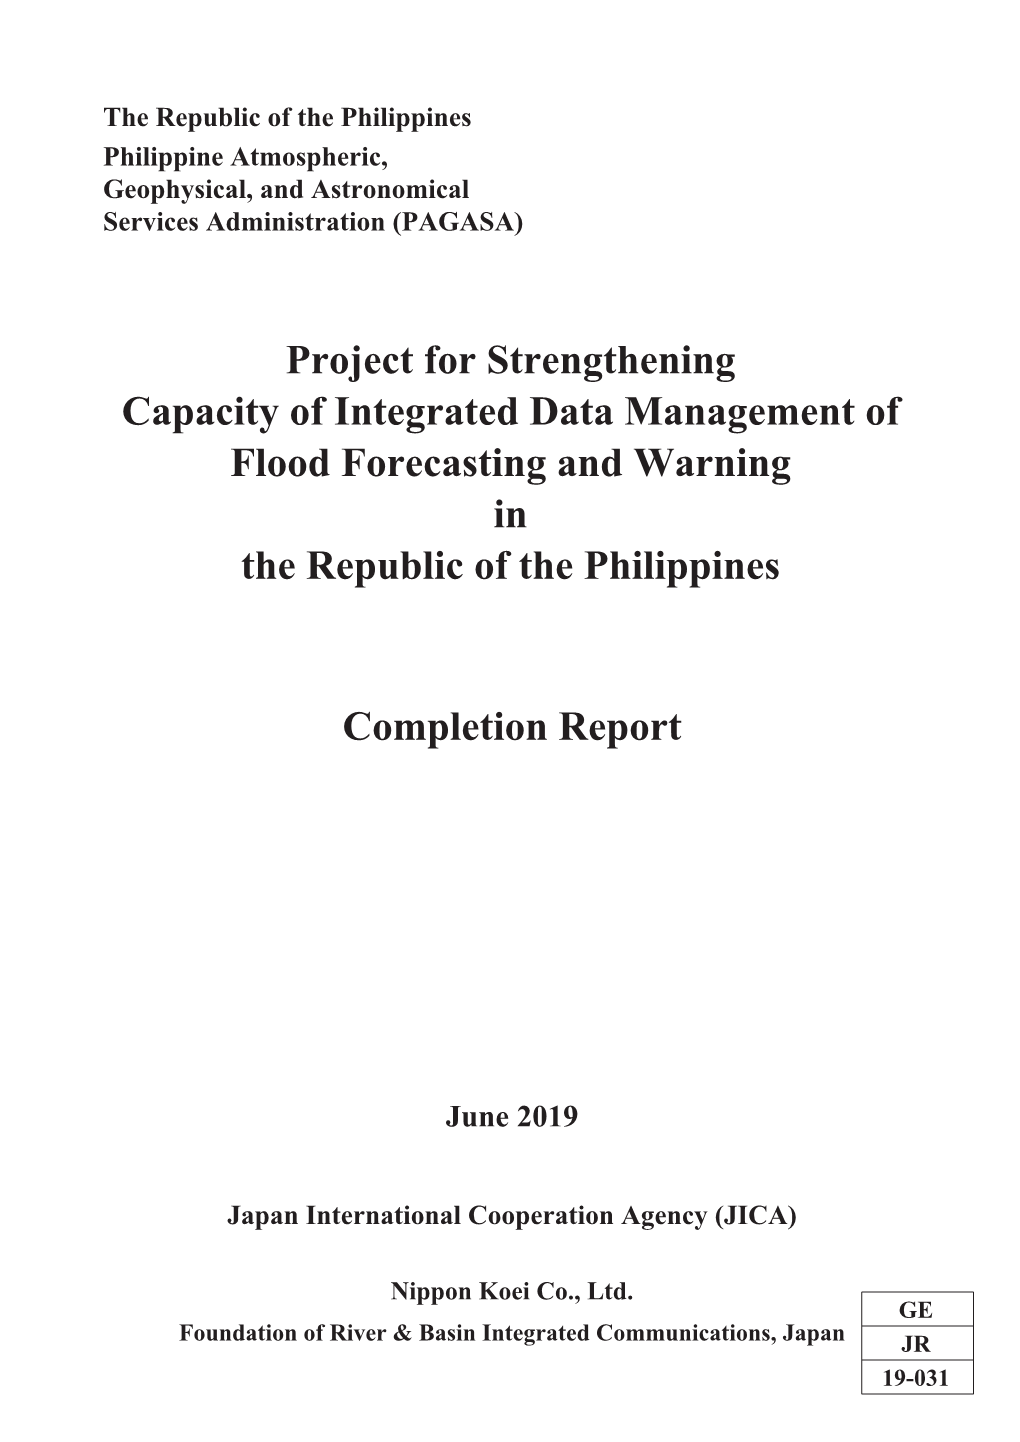 Project for Strengthening Capacity of Integrated Data Management of Flood Forecasting and Warning in the Republic of the Philippines